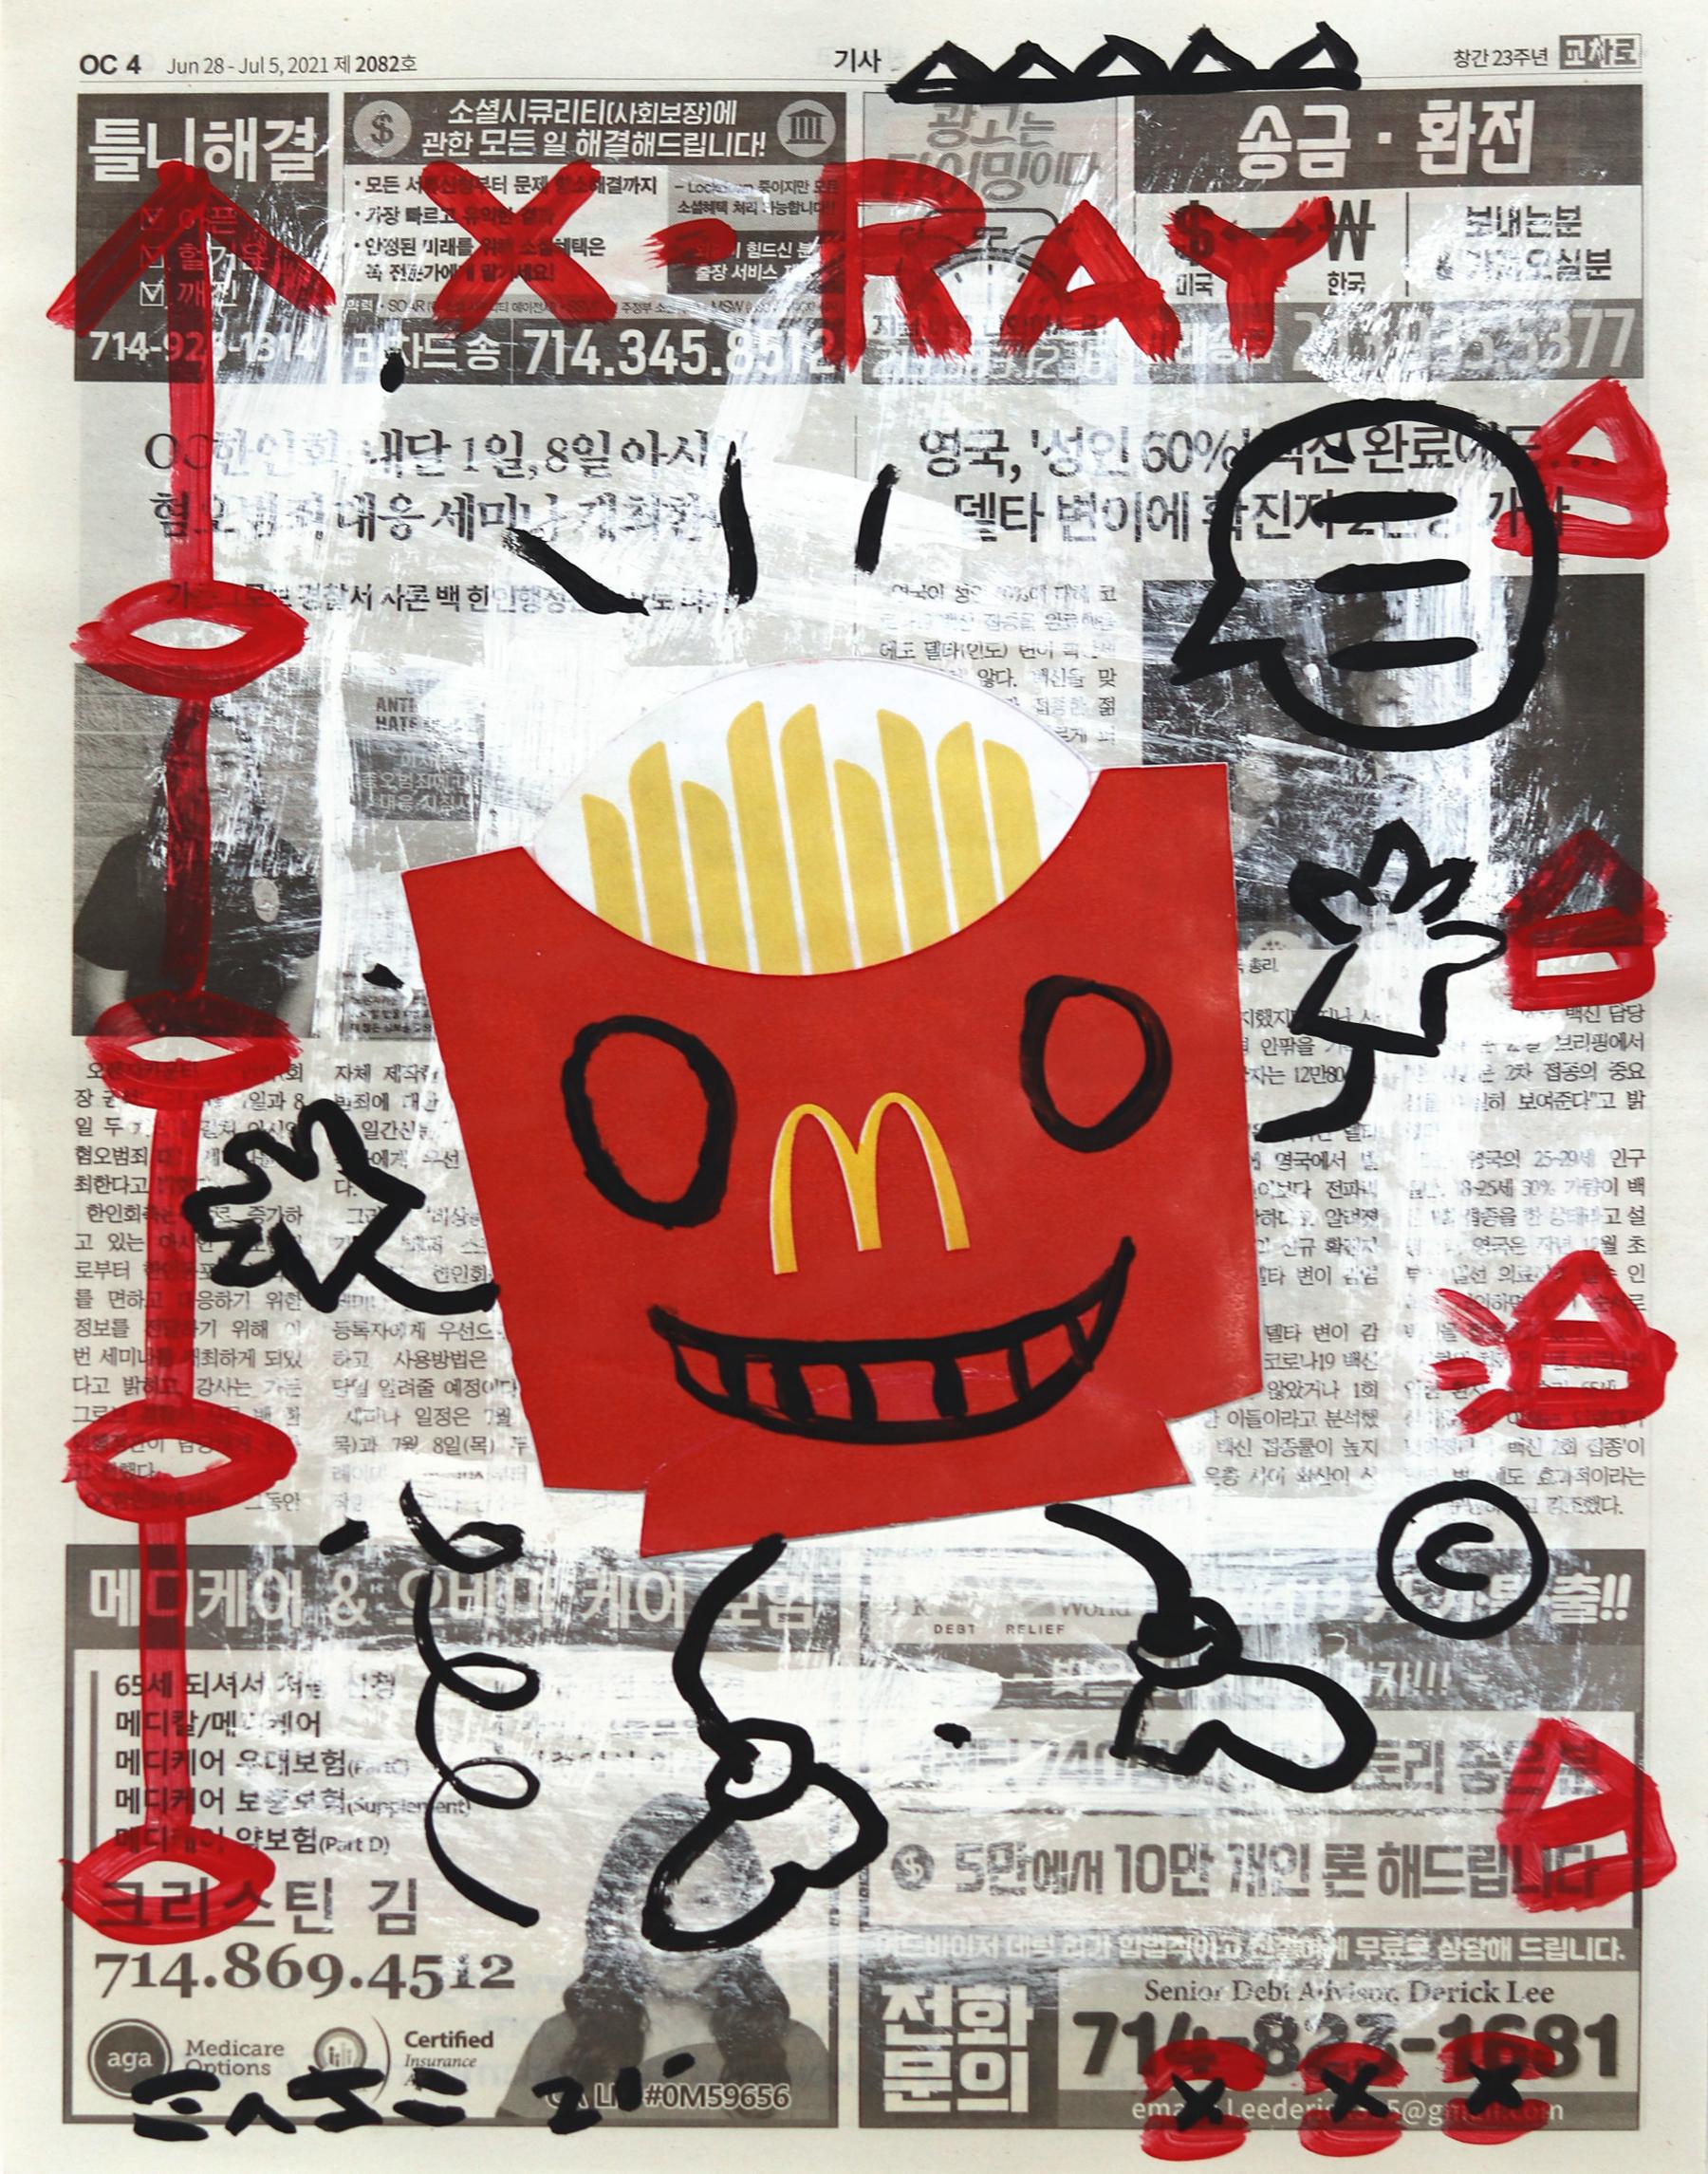 Gary John Still-Life Painting - "Chipper Chips" - Original Mixed Media Painting French Fries on Newspaper